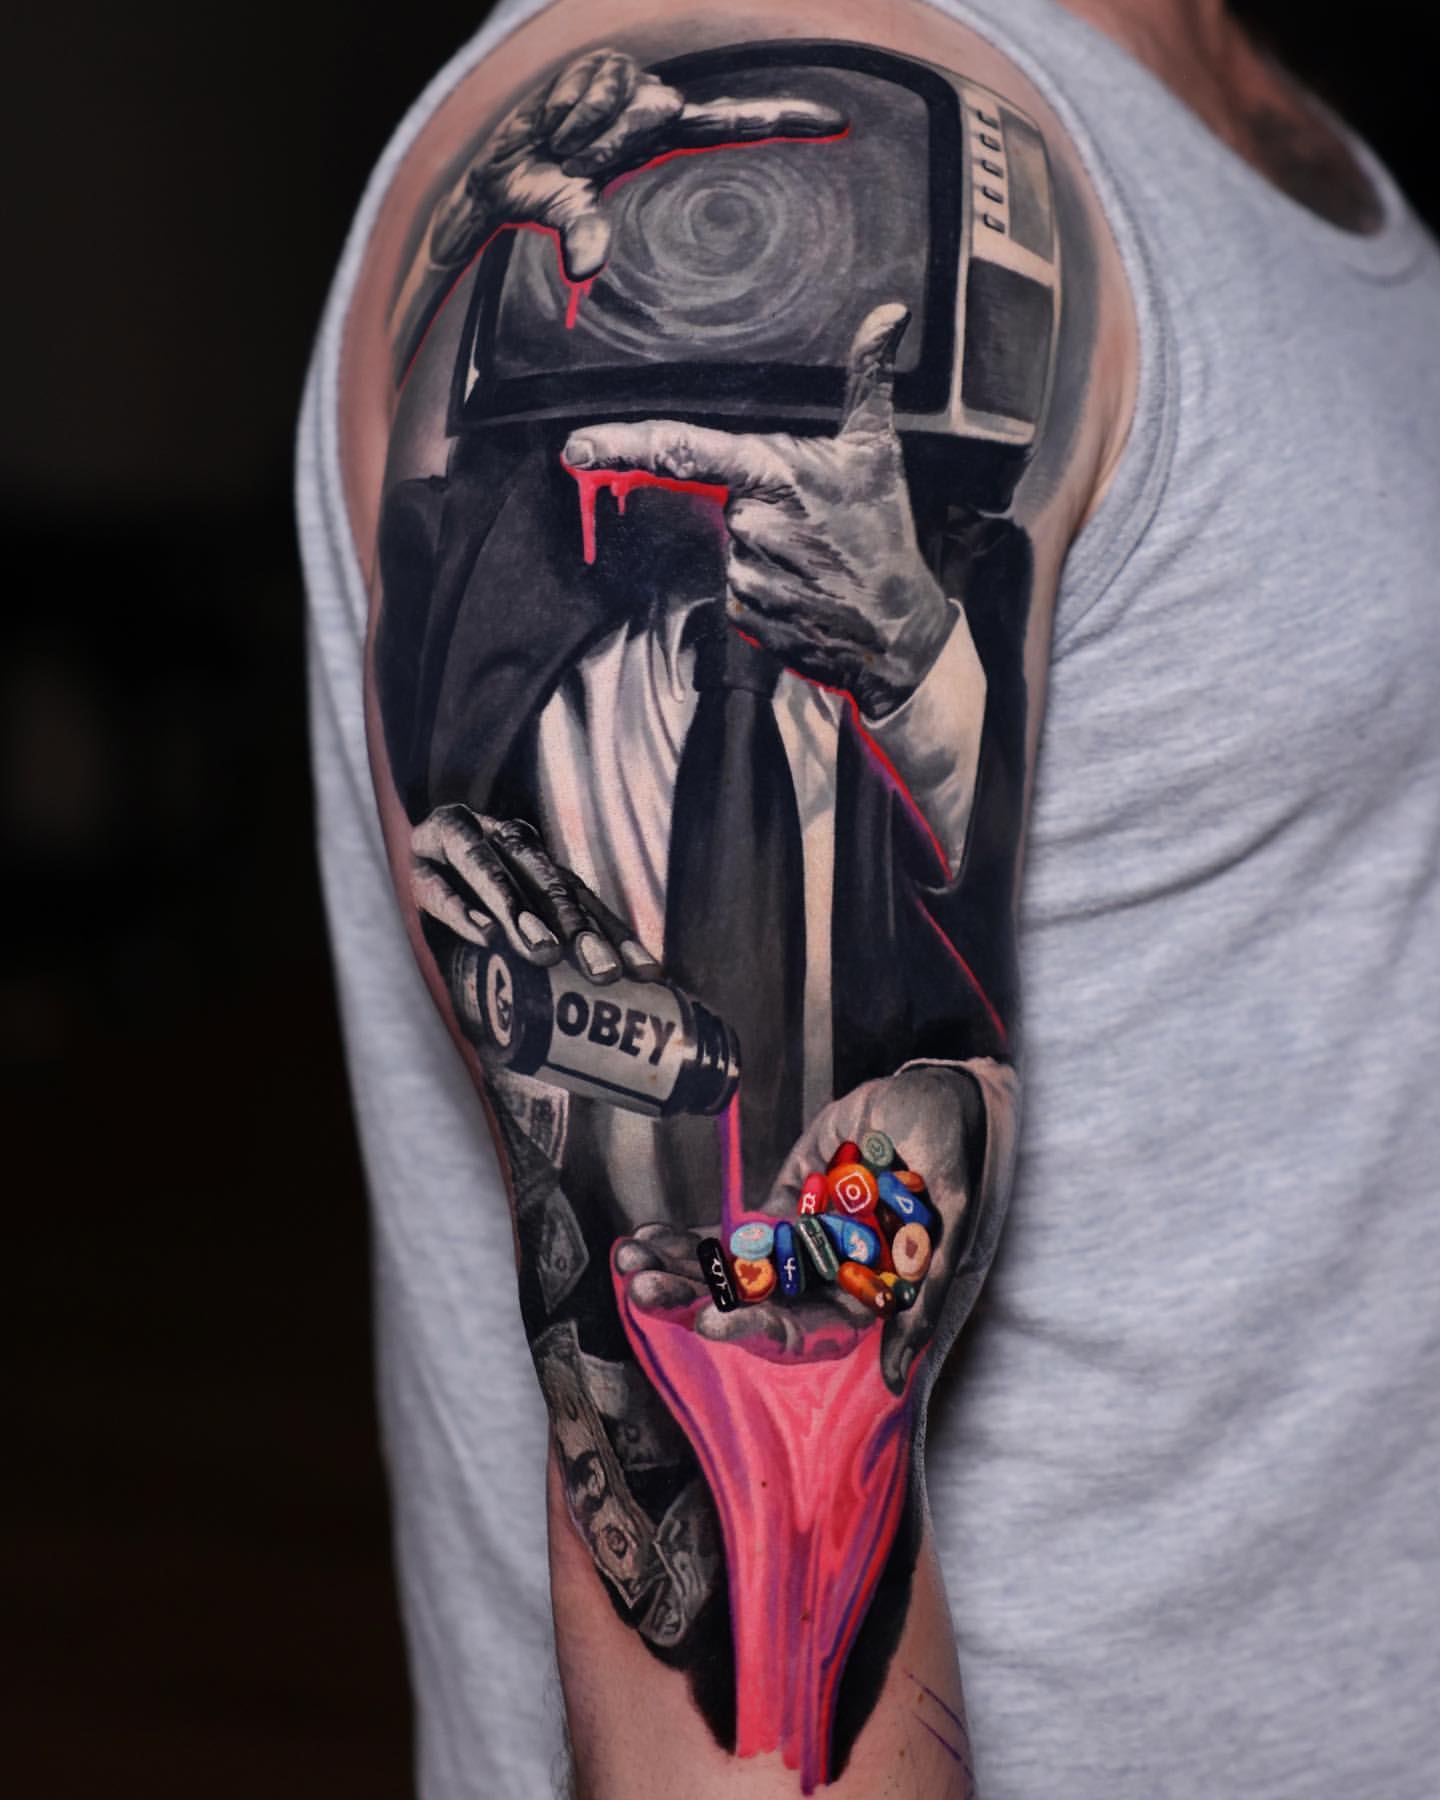 100 Awesome Arm Tattoo Designs | Art and Design